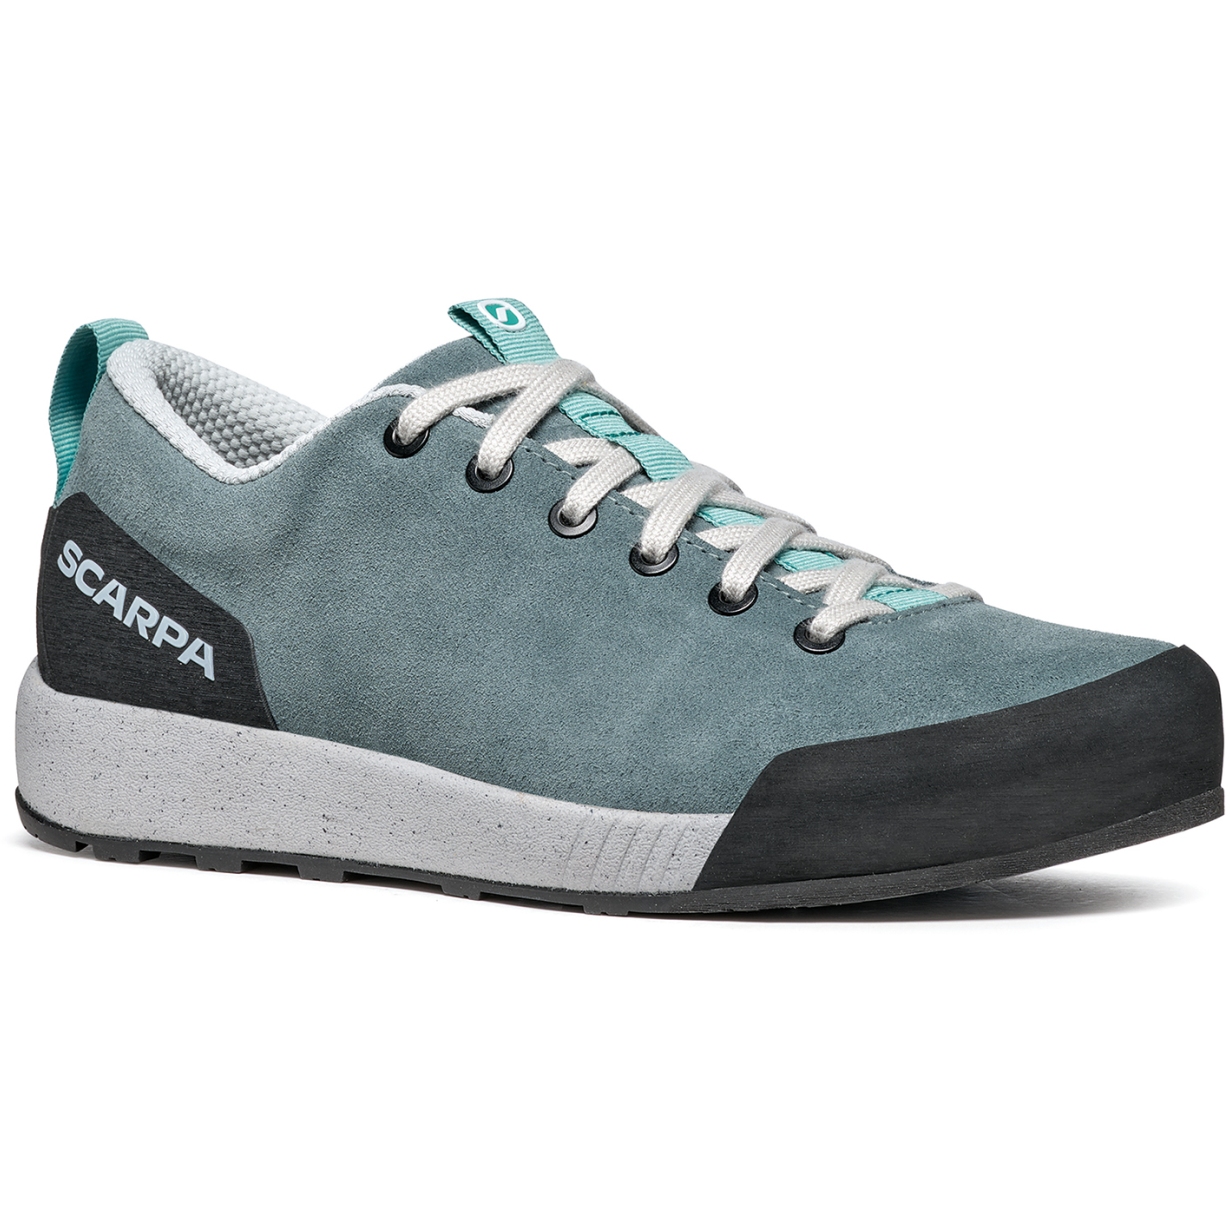 Picture of Scarpa Spirit Evo Approach Shoes - conifer